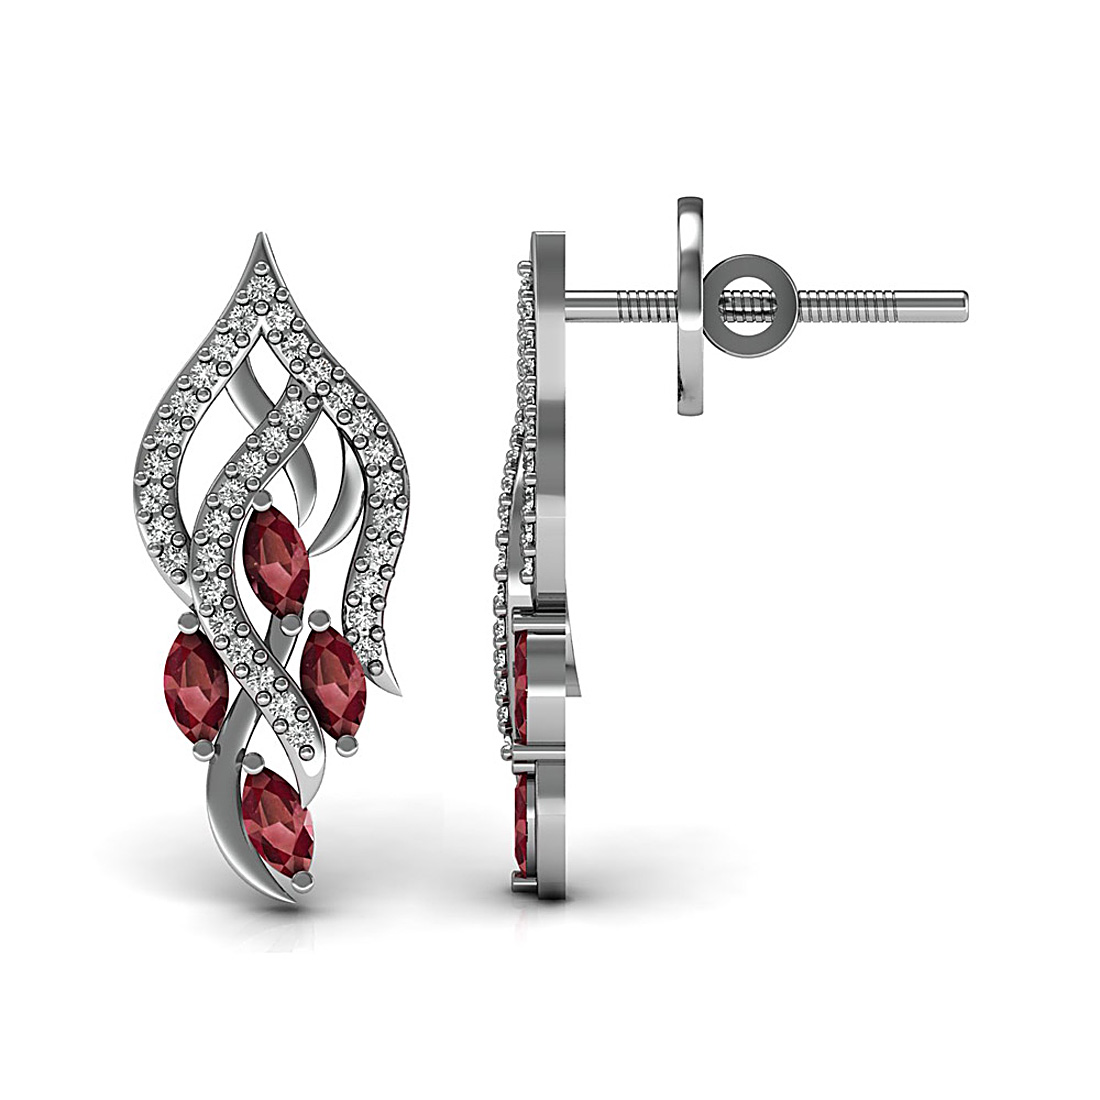 18K Solid white gold flower stud earrings studded with natural ruby and genuine diamond.